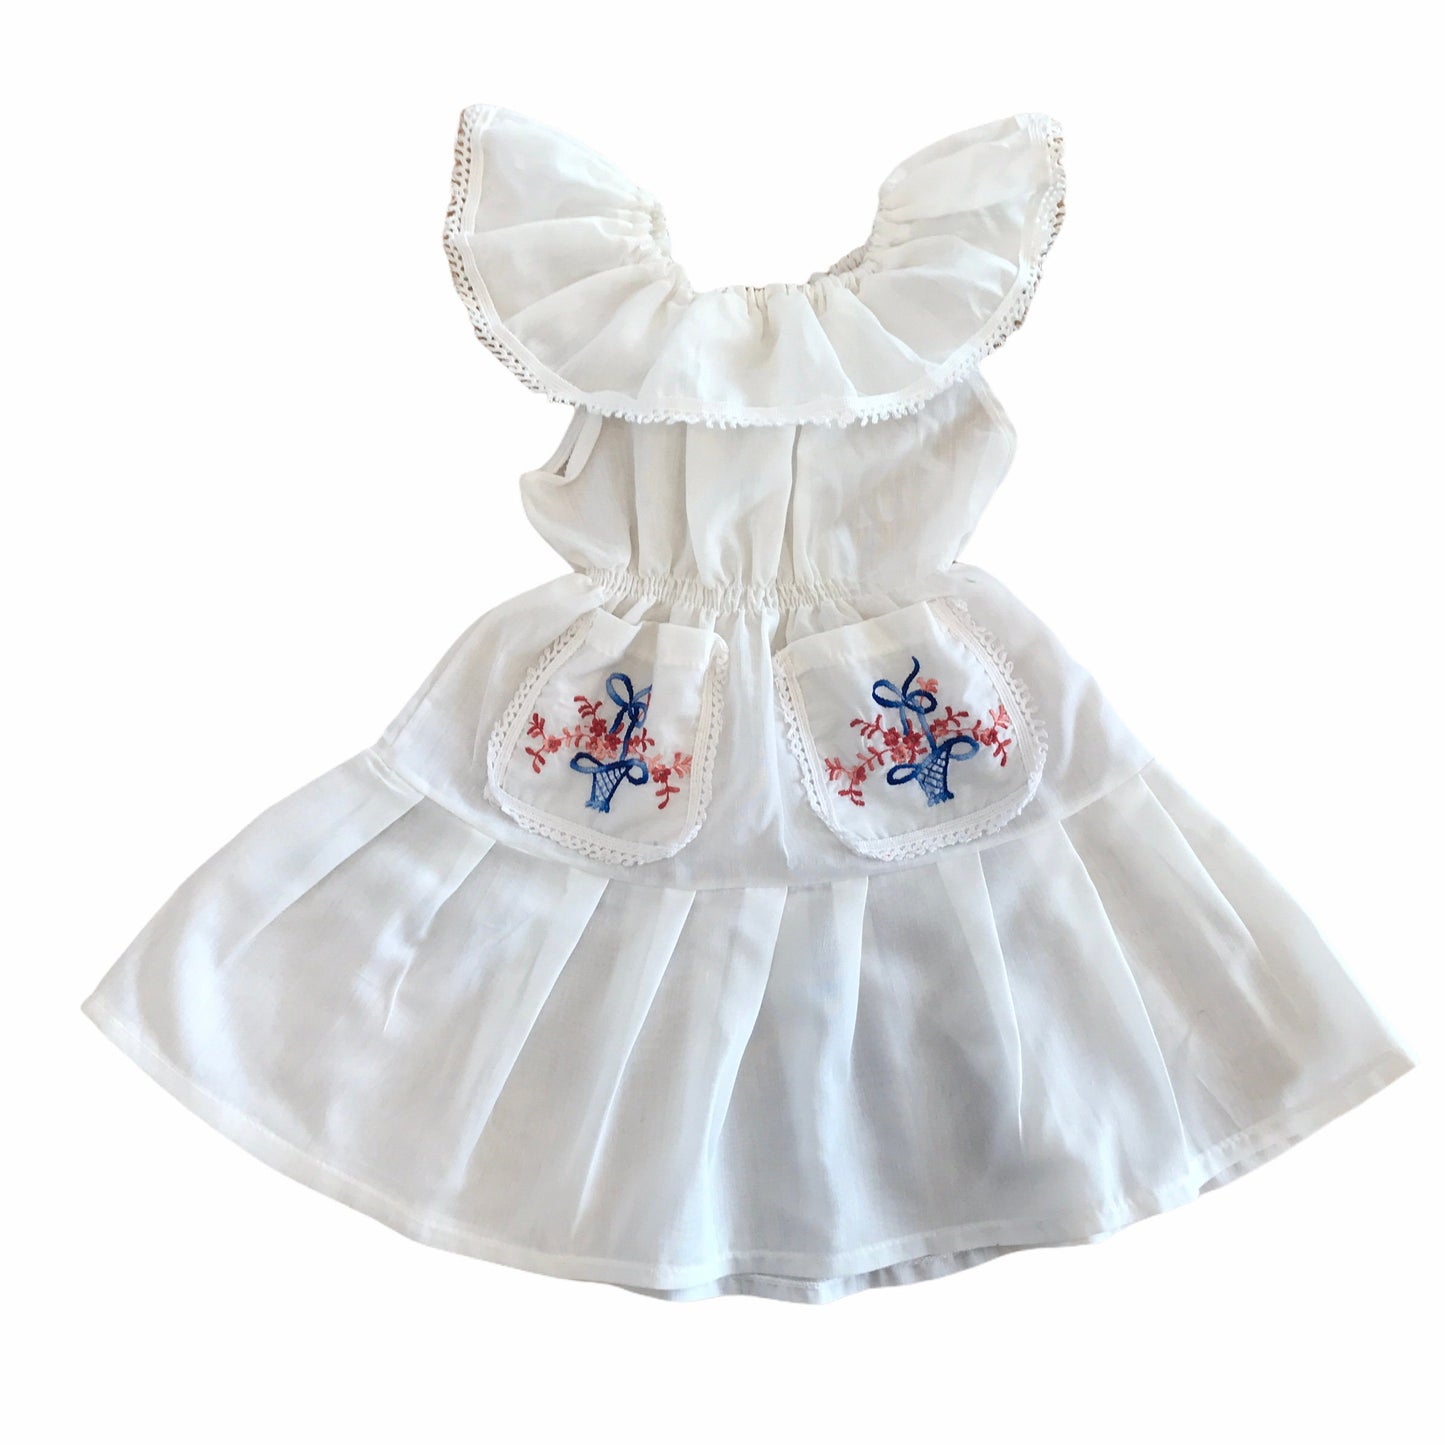 Vintage 1970s White Embroidered Boho Dress British Made 9-12 Months